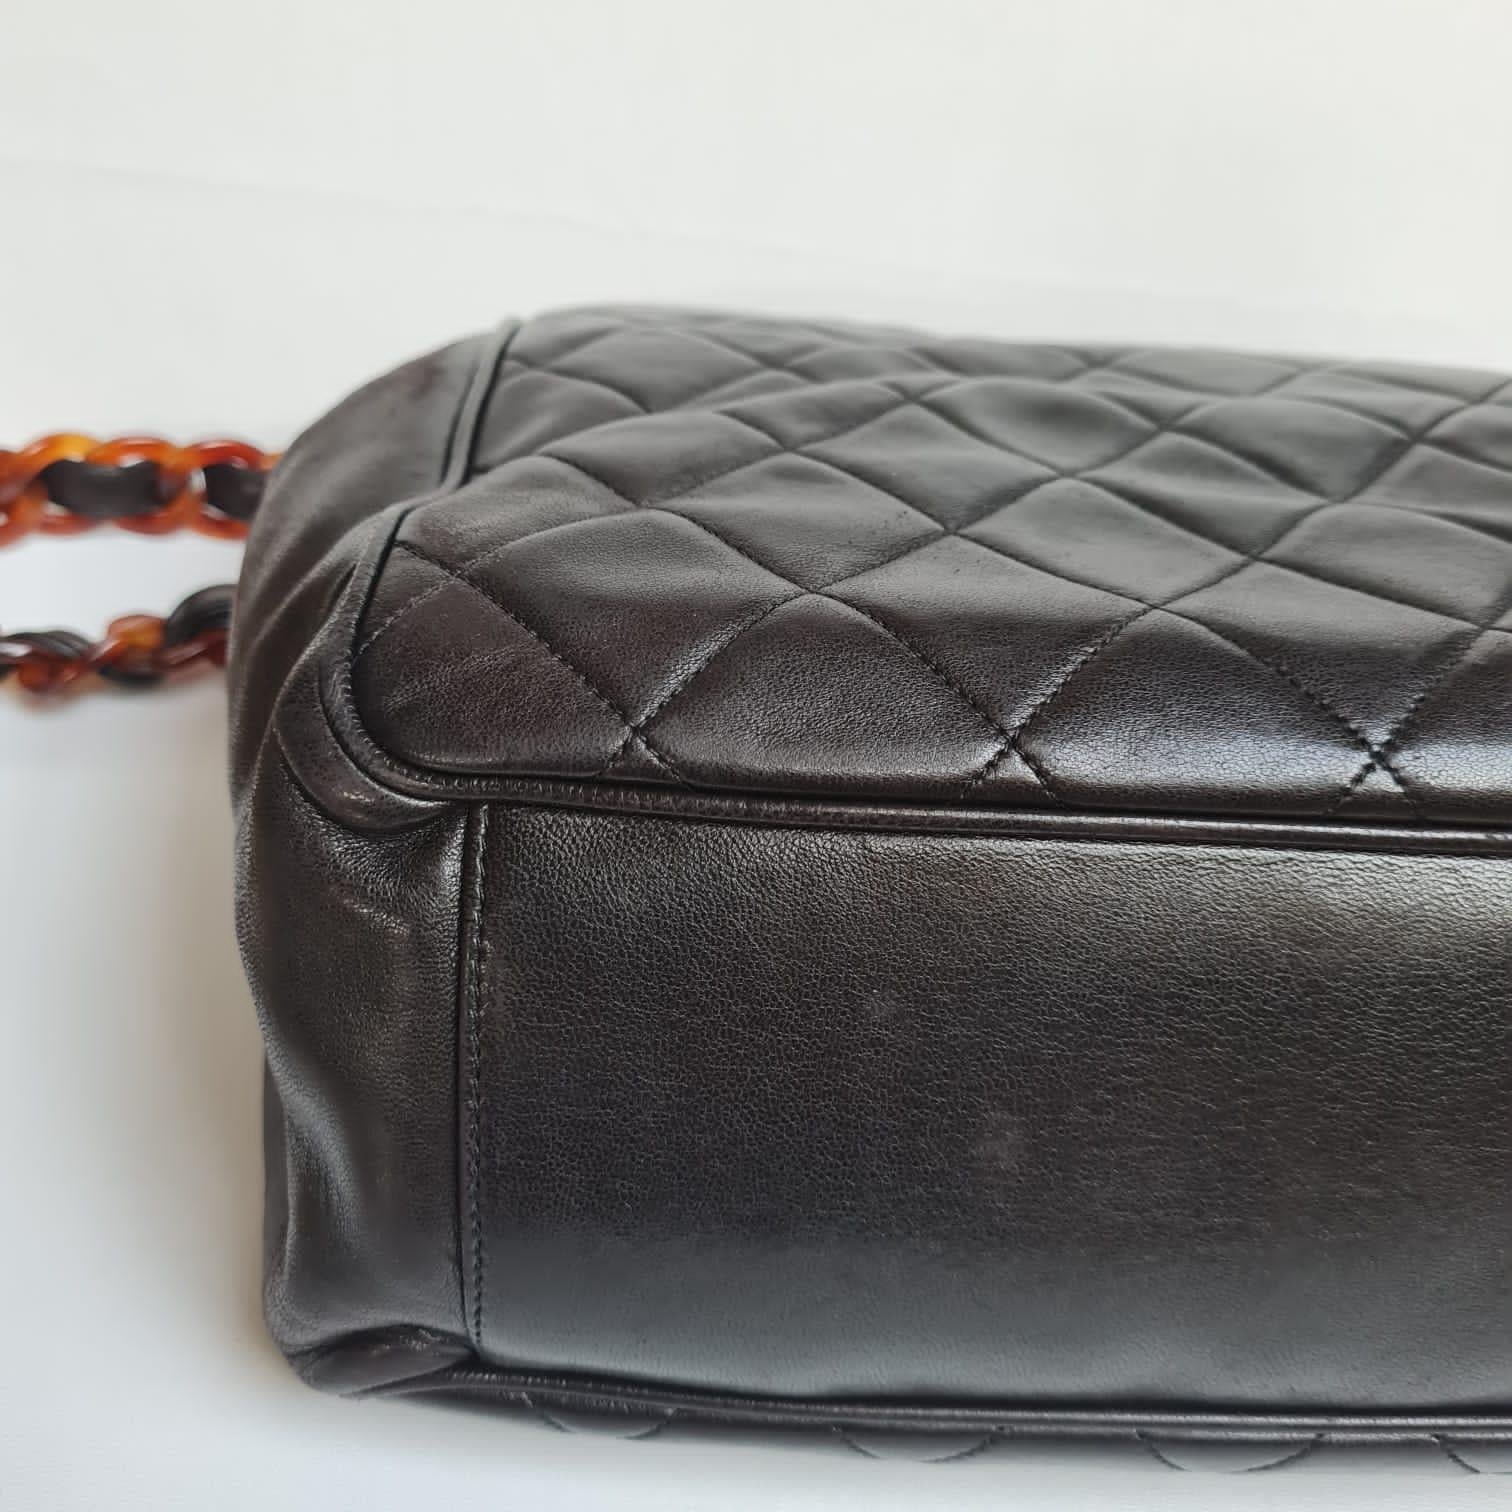 Rare Vintage 1990s Chanel Black Quilted Tortoiseshell Round Flap Bag For Sale 5